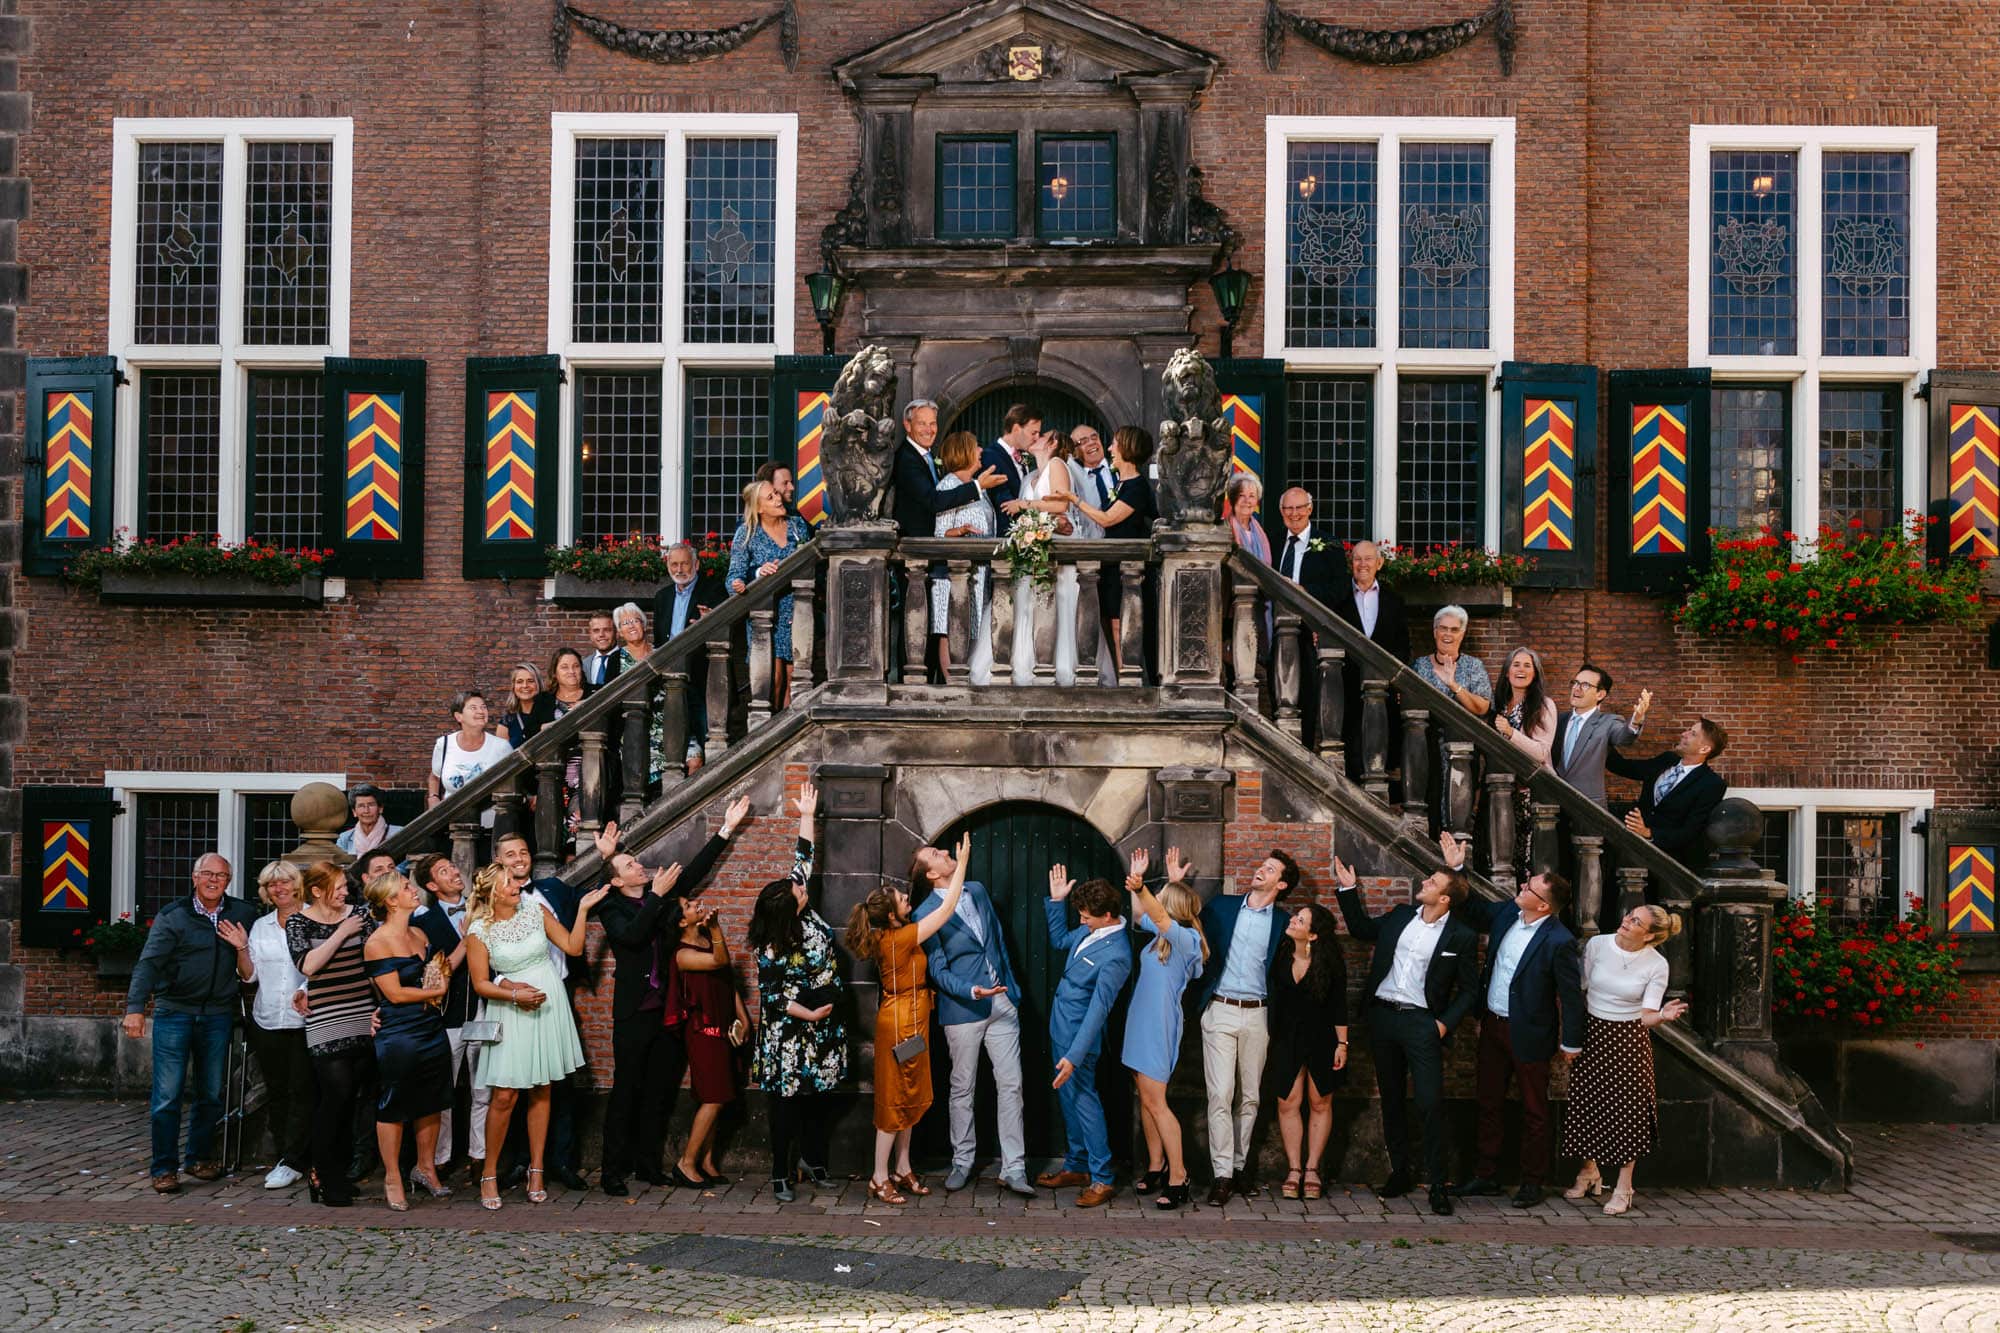 A group of people pose in front of a building.